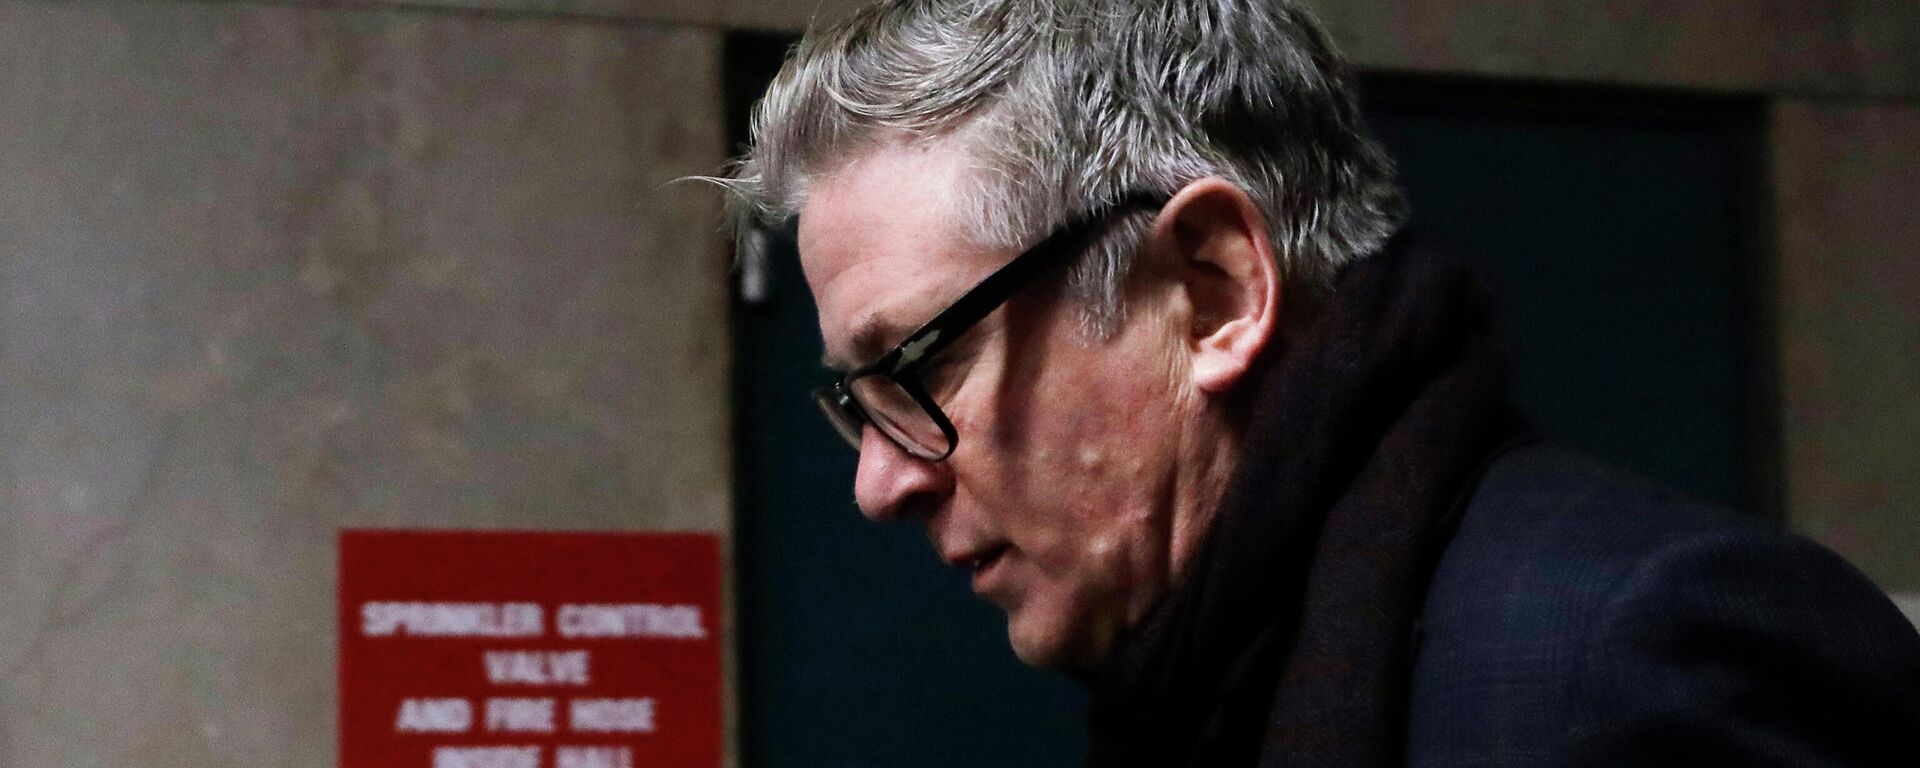 Actor Alec Baldwin arrives in a New York City court, Wednesday, Jan. 23, 2019, for a hearing on charges that he slugged a man during a dispute over a parking spot last fall - Sputnik International, 1920, 19.01.2023